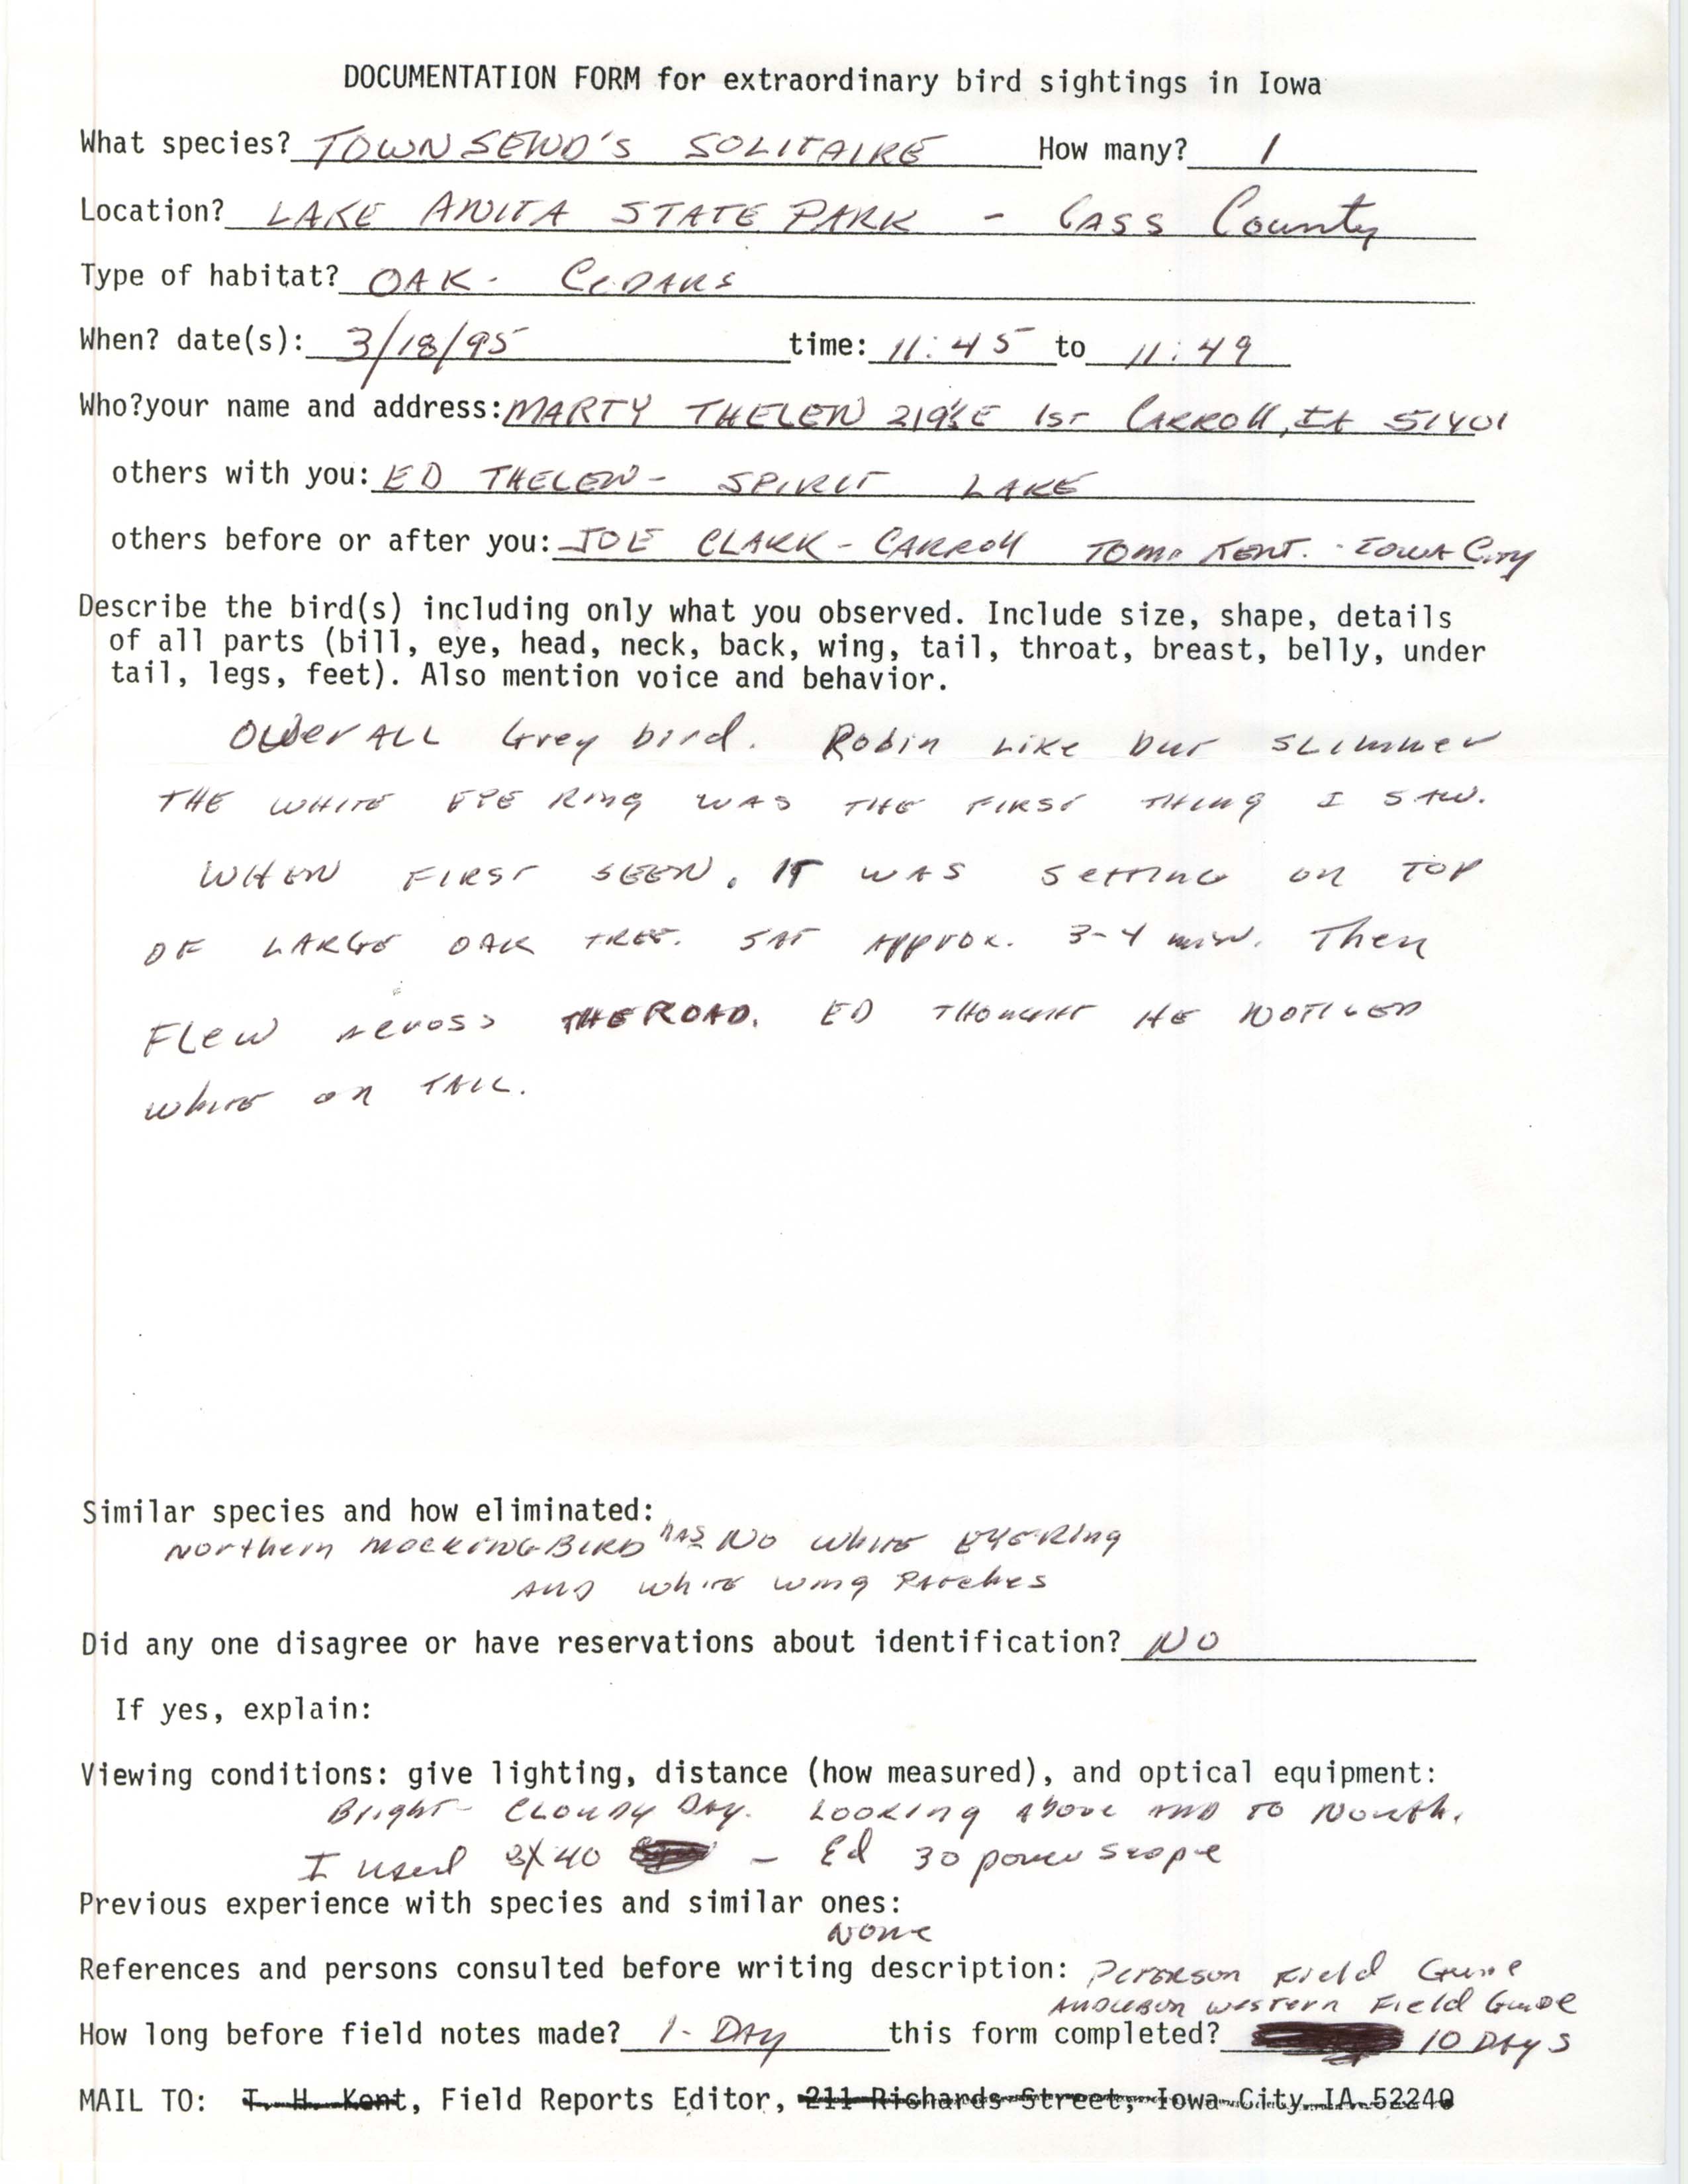 Rare bird documentation form for Townsend's Solitaire at Lake Anita State Park in 1995